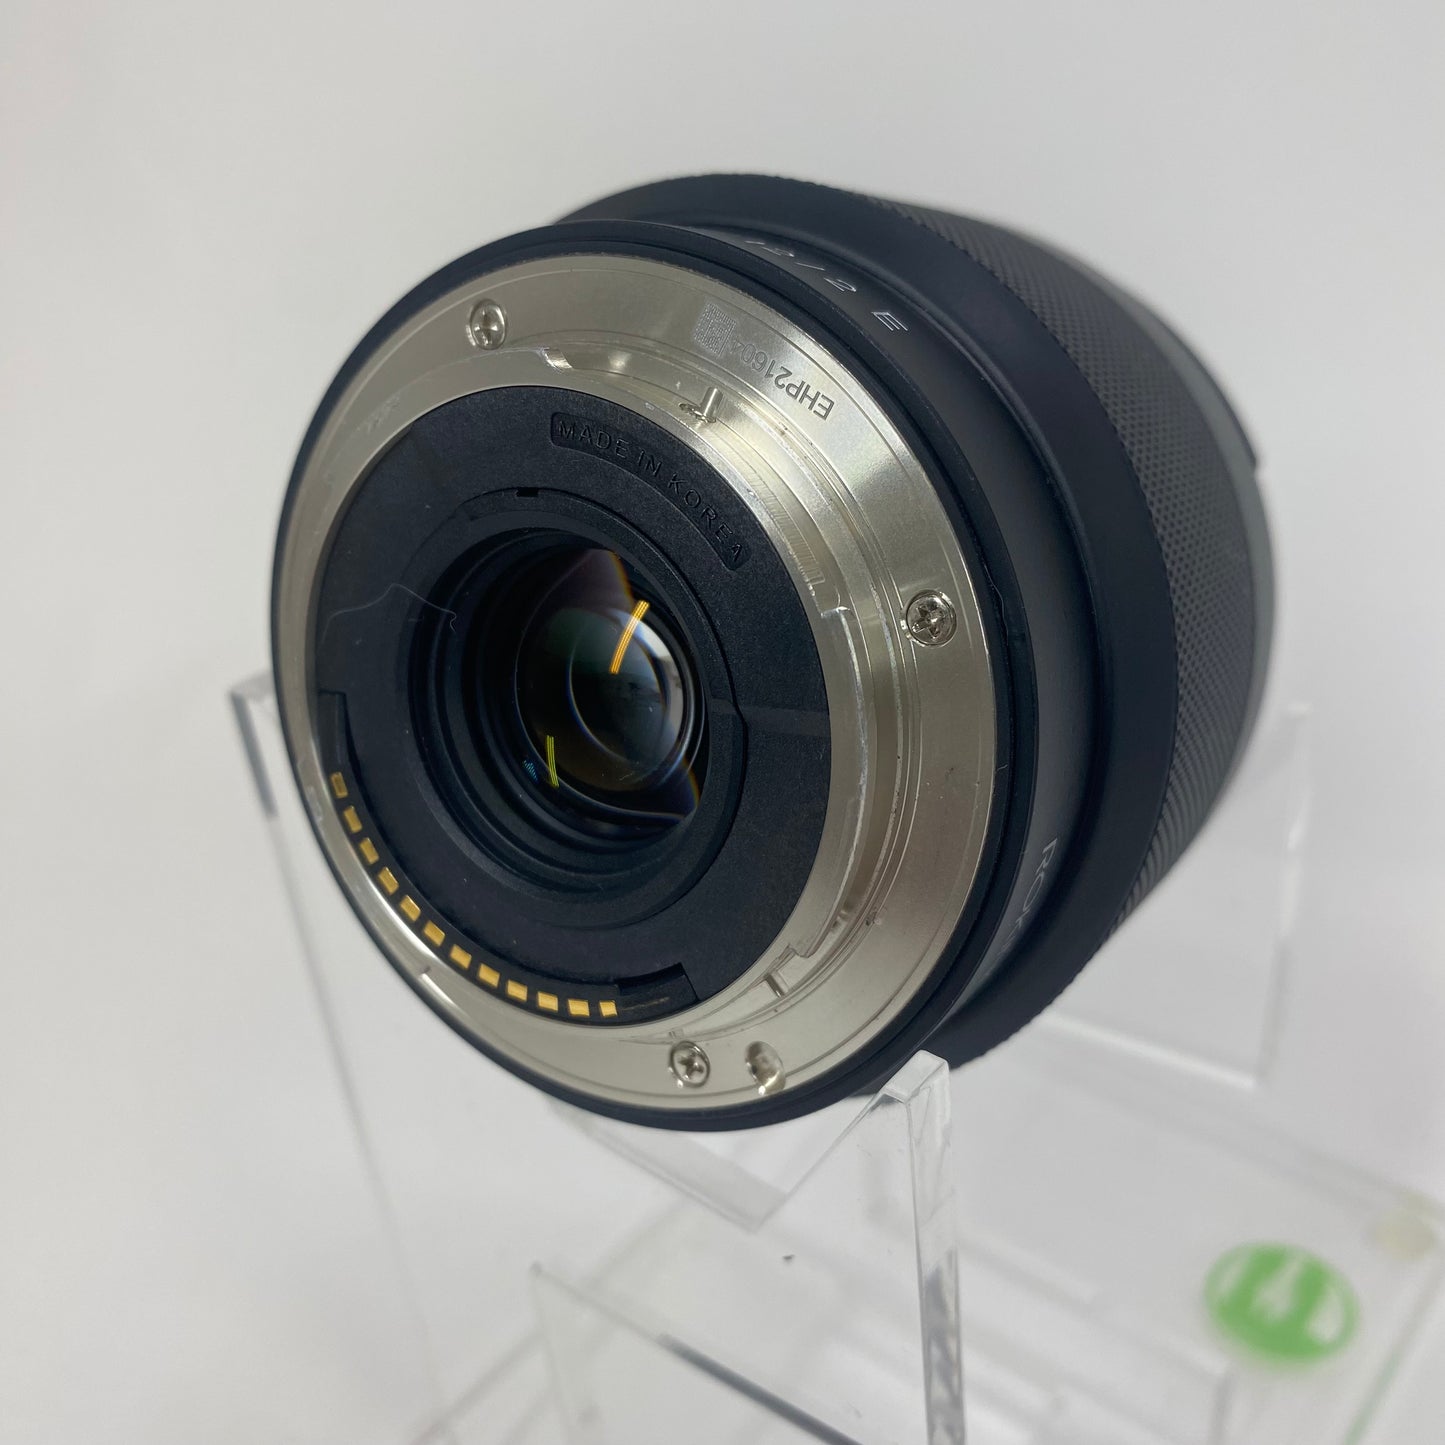 Rokinon Ultra Wide Angle 12mm f/2.0 For Sony E-Mount